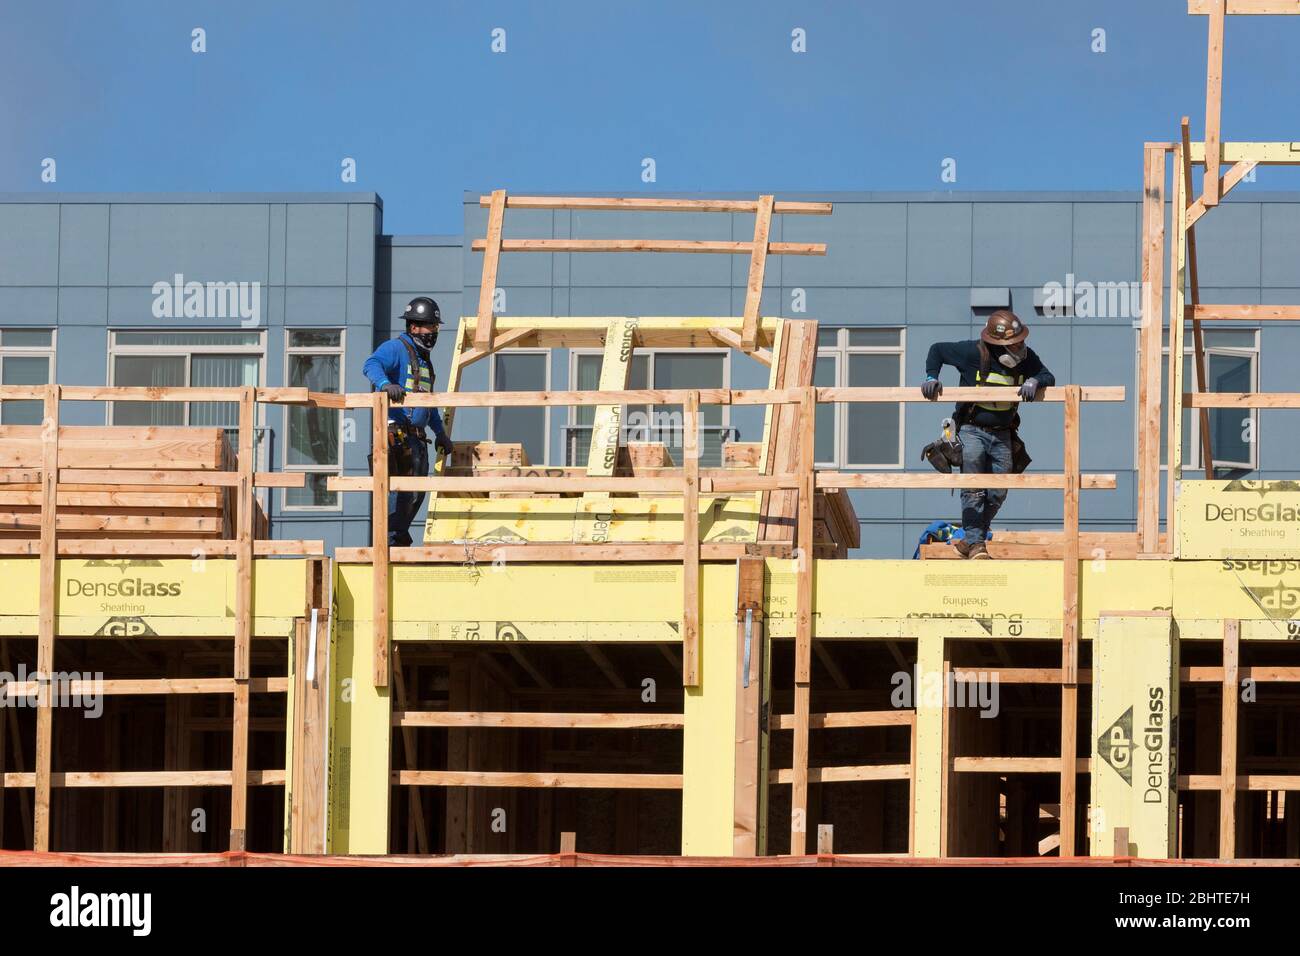 Workers wear face masks at a building site in West Seattle as construction resumes on Monday, April 27, 2020. Low-risk residential and commercial construction projects must comply with COVID-19 worksite-specific safety practices to resume. Stock Photo